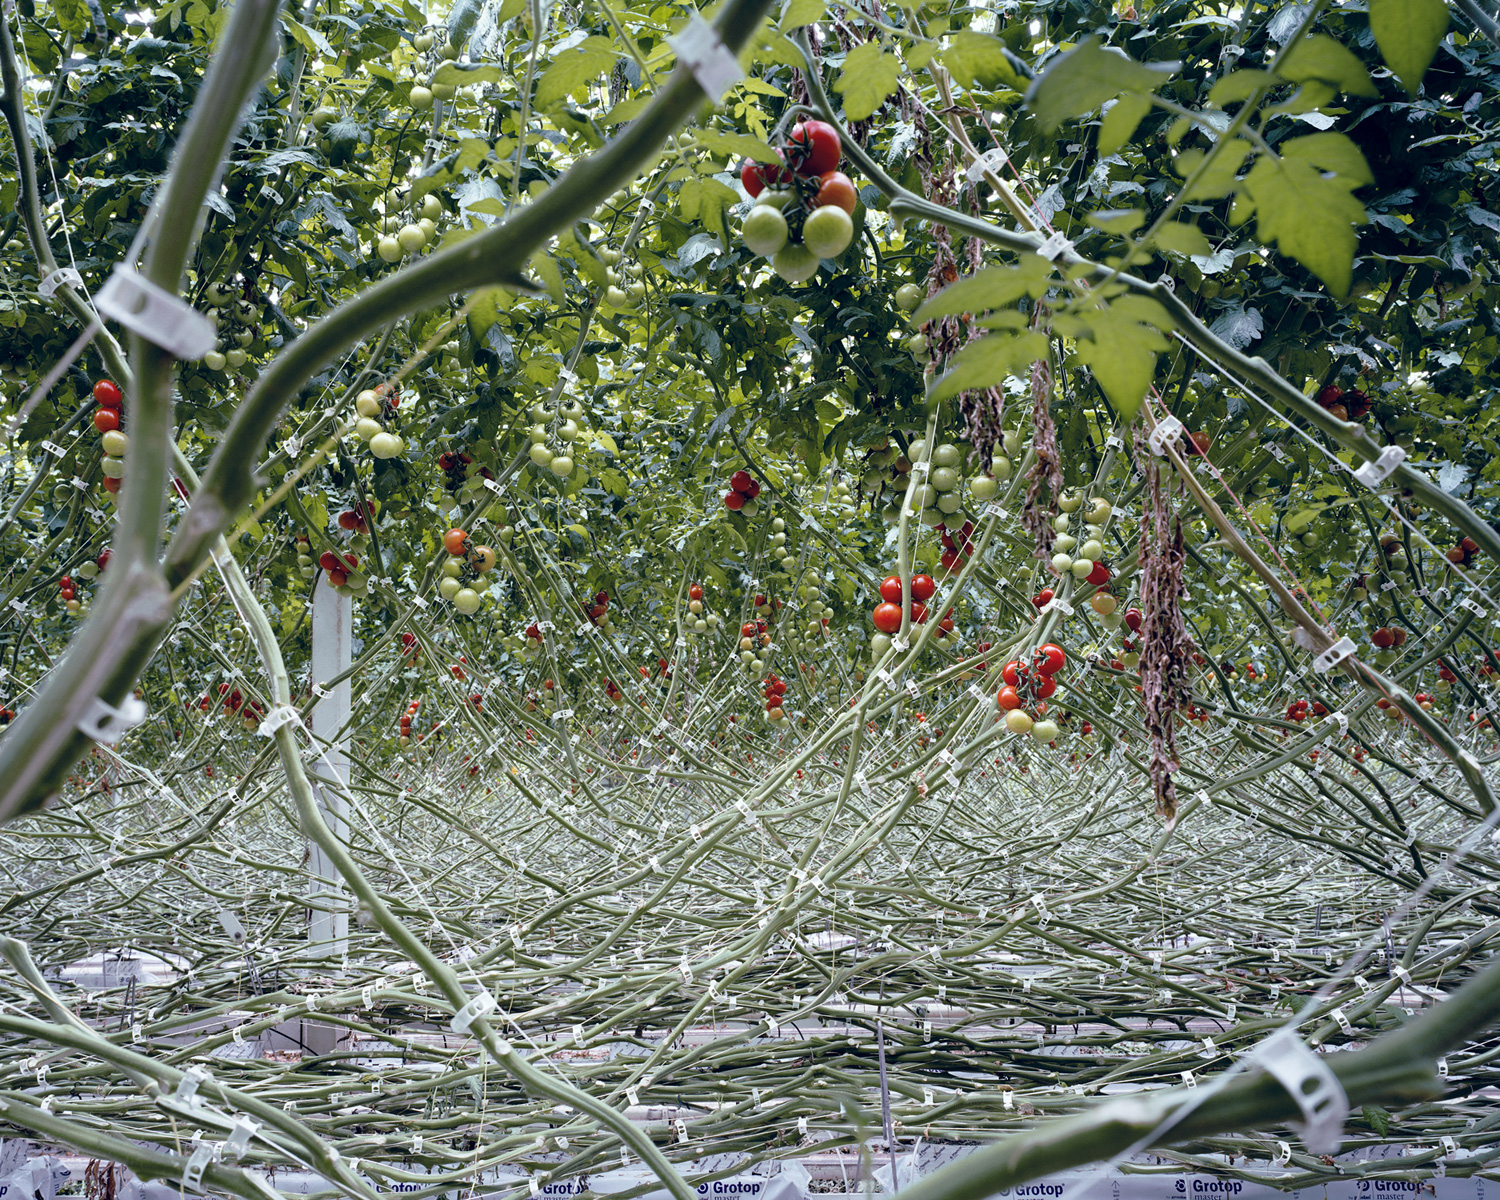  Tomatoes I, 2012  In order to have total control over the nutrients and the irrigation, tomatoes are&nbsp;planted in sterile material such as rock wool and not in soil. By doing so the&nbsp;tomatoes are according to the growers less likely infected 